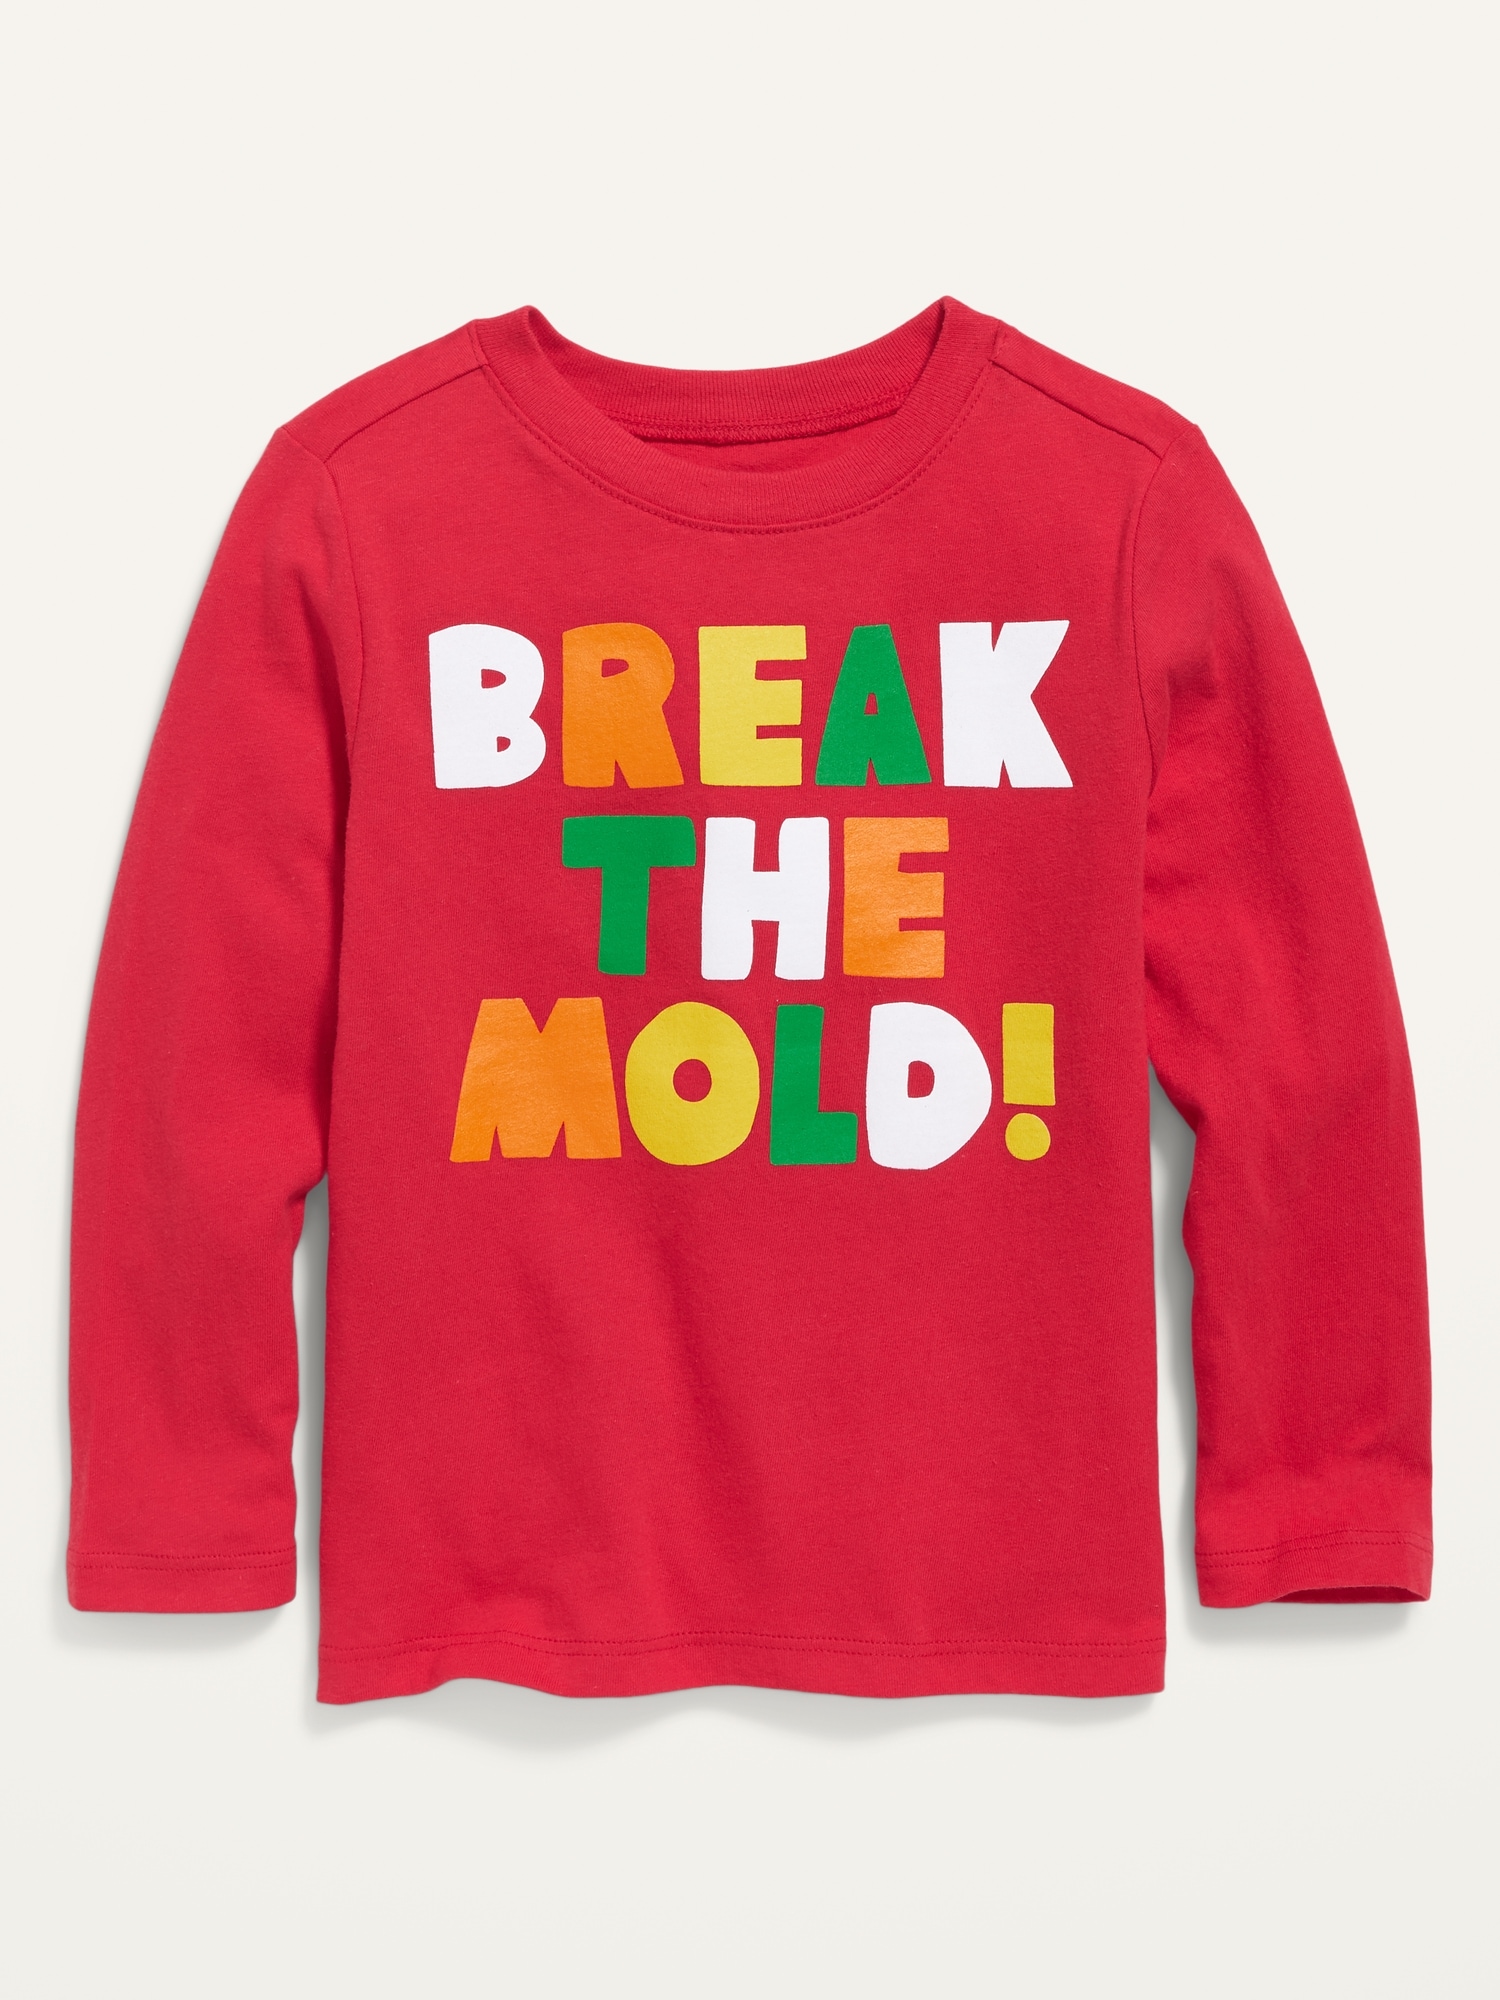 Unisex Graphic Long-Sleeve Tee for Toddler